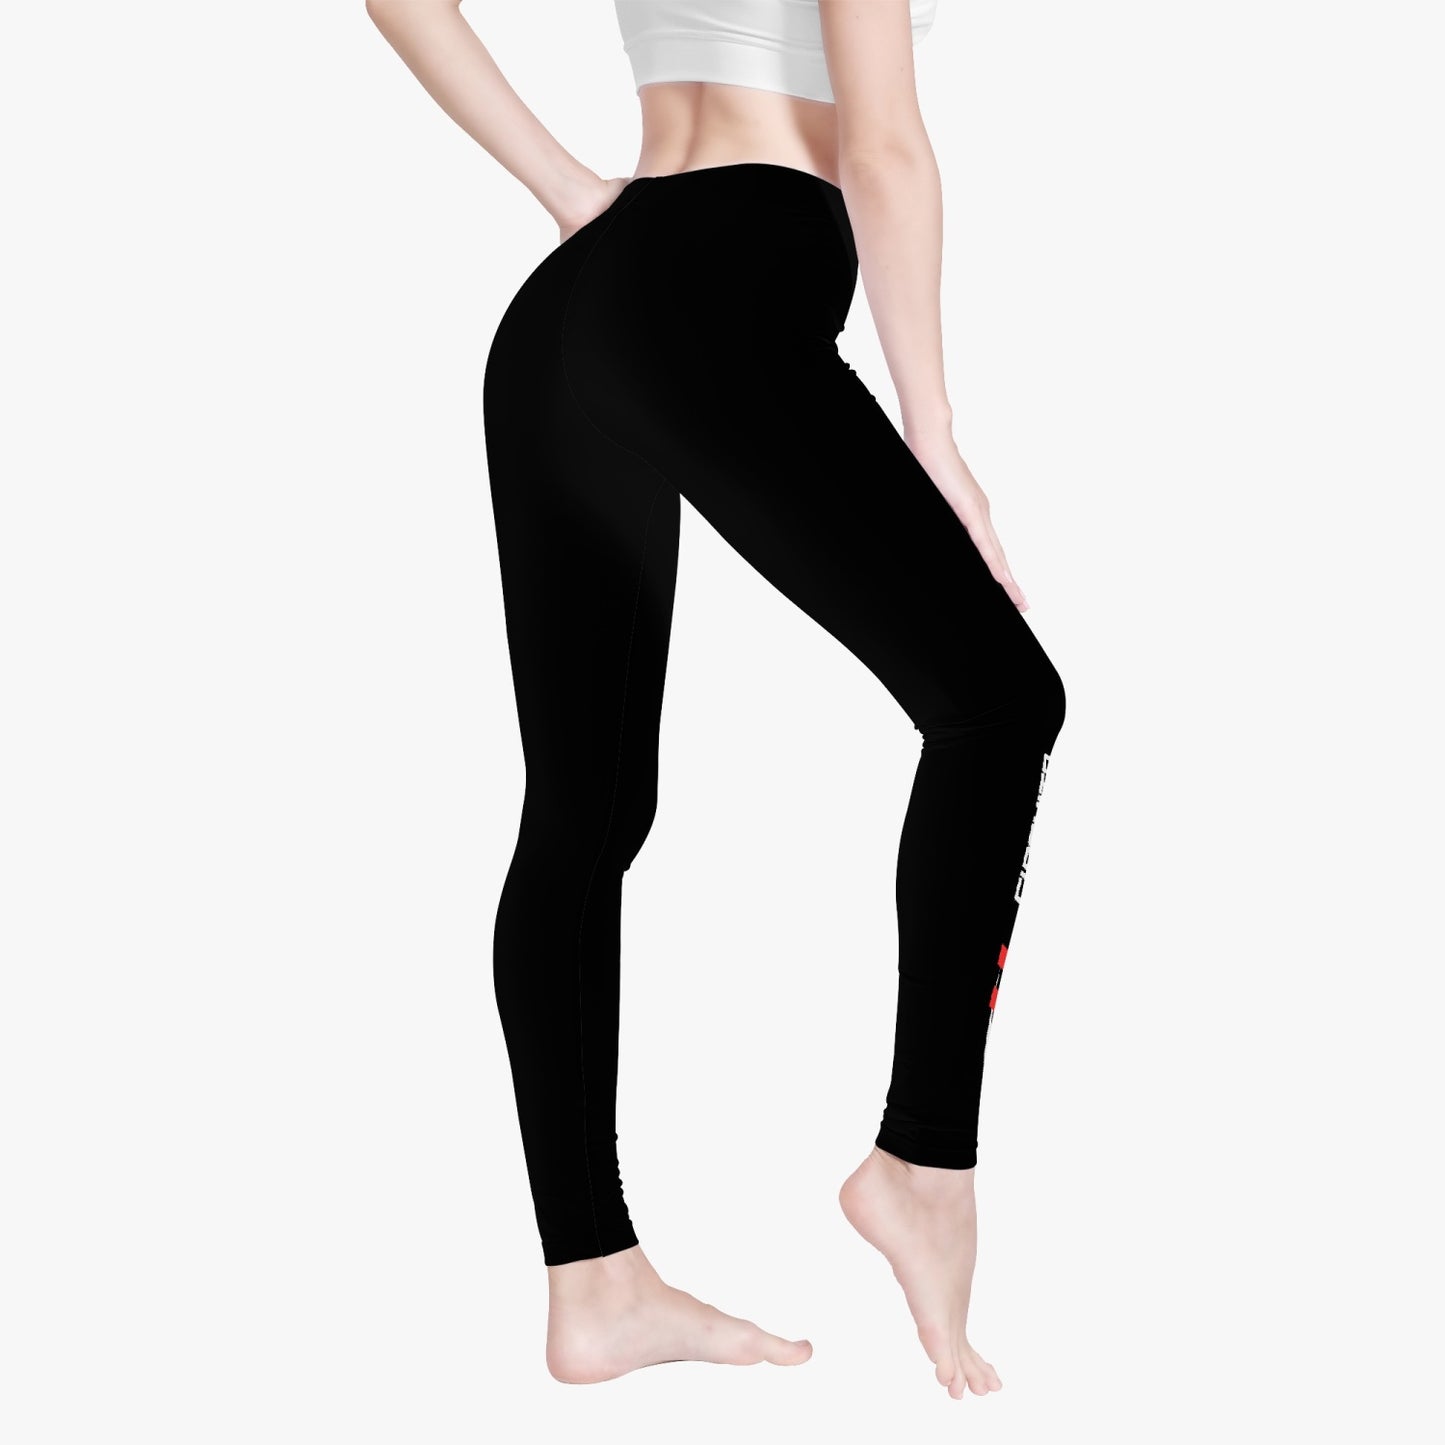 CIRCUITO MIKE G GUADIX women's High-Waisted Leggings - carbon